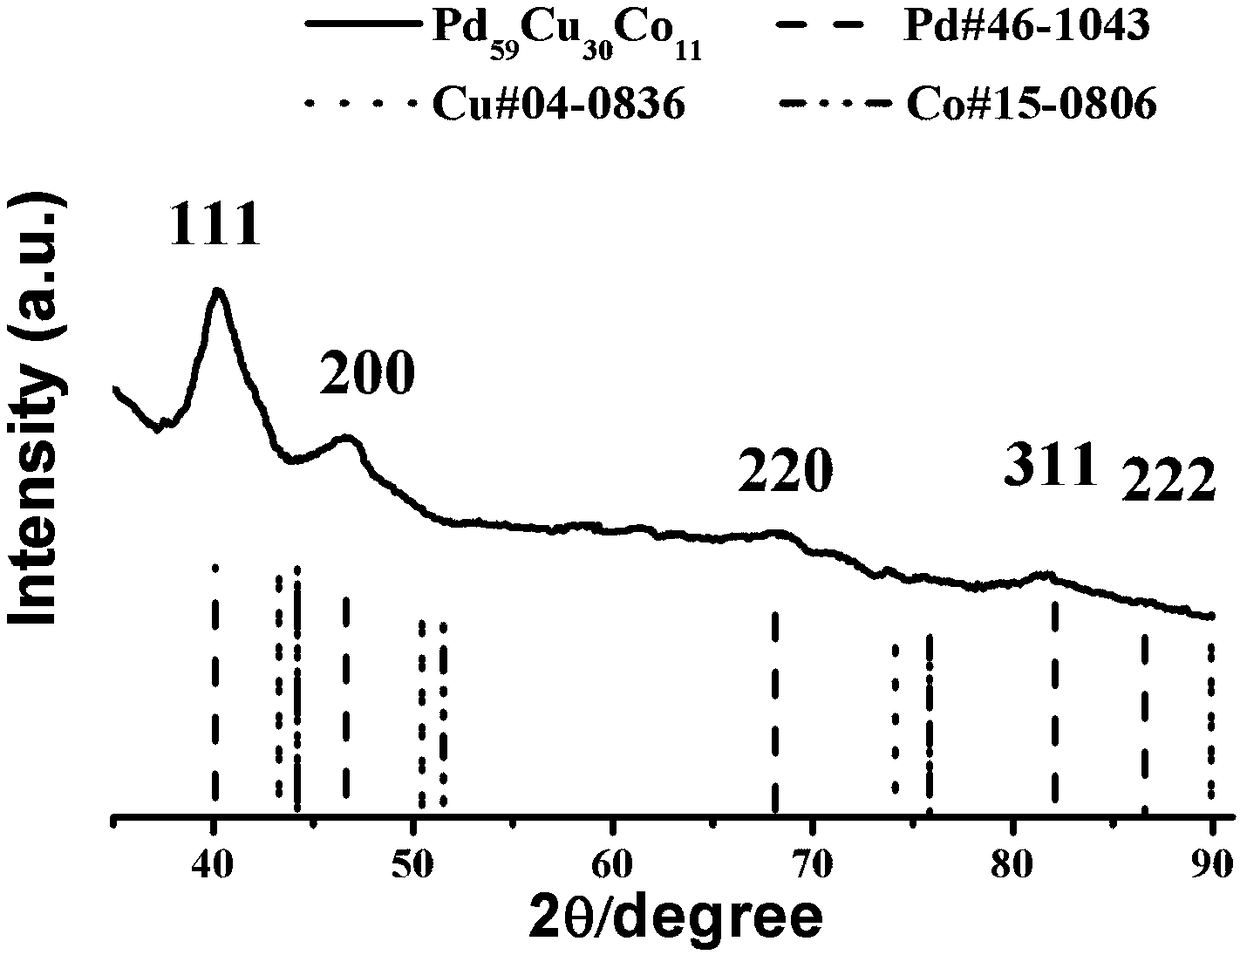 Non-platinum dendritic crystal-shaped ternary PdCuCo alloy nanometer catalyst used for fuel cell